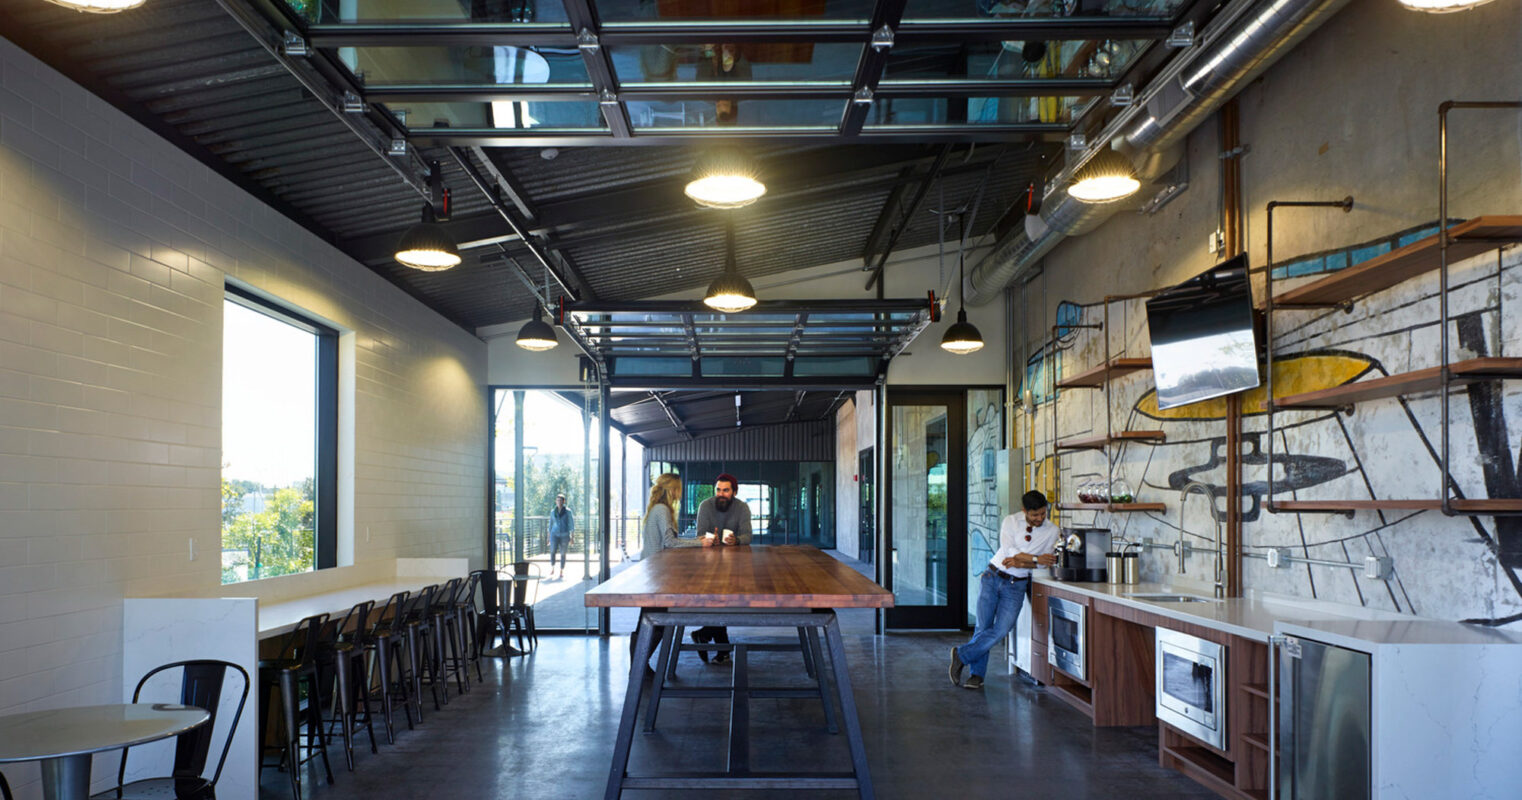 Modern industrial-themed café interior featuring exposed ceiling pipes, track lighting, and a polished concrete floor. Large windows and a glass ceiling section flood the space with natural light. A communal wooden table, bar stools, and counter service area emphasize a casual, social atmosphere.